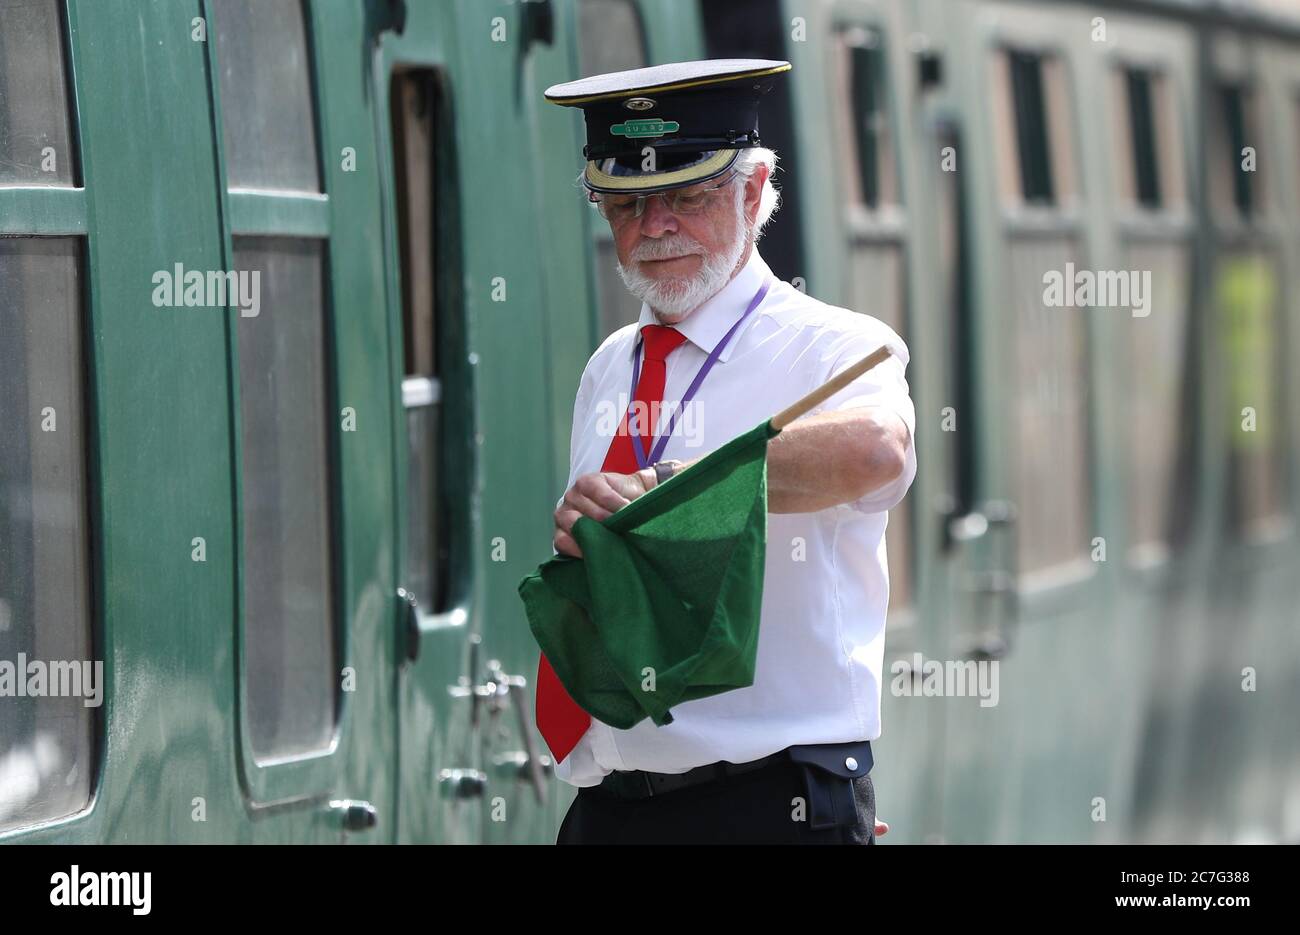 Guard Ian Coane checks his watch on the platform at Swanage station, as final preparations are made at the Swanage Railway ahead of the running of steam trains for the first time since the coronavirus lockdown in March. The heritage railway on the Isle of Purbeck, Dorset, will use steam engines again on Saturday with a non-stop service between Swanage and Norden stations with social distancing in place at stations and on trains and the wearing of face coverings. Stock Photo